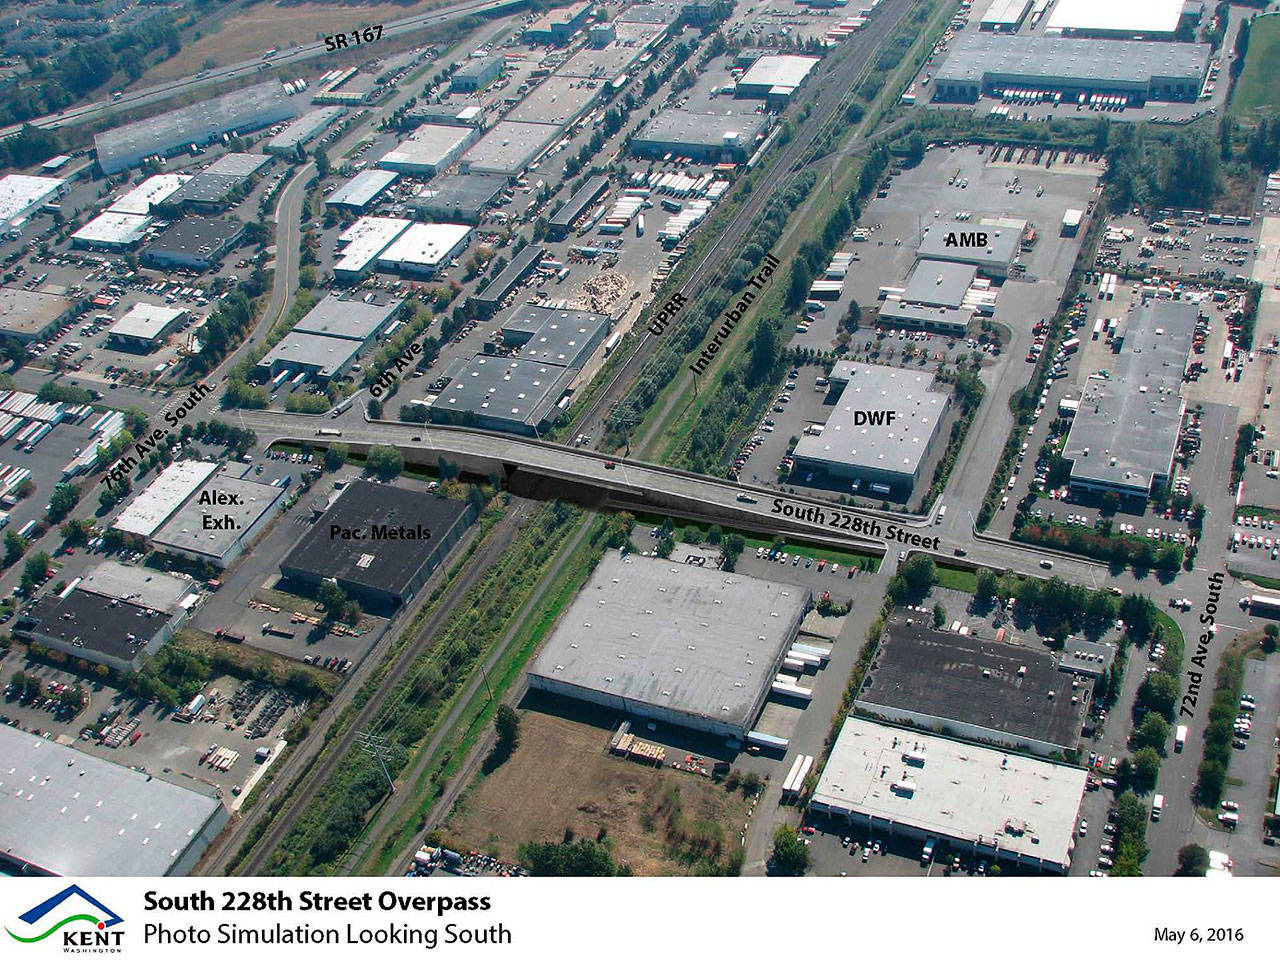 The city of Kent will build an overpass over the Union Pacific Railroad tracks along South 228th Street to improve traffic flow. COURTESY GRAPHIC, City of Kent